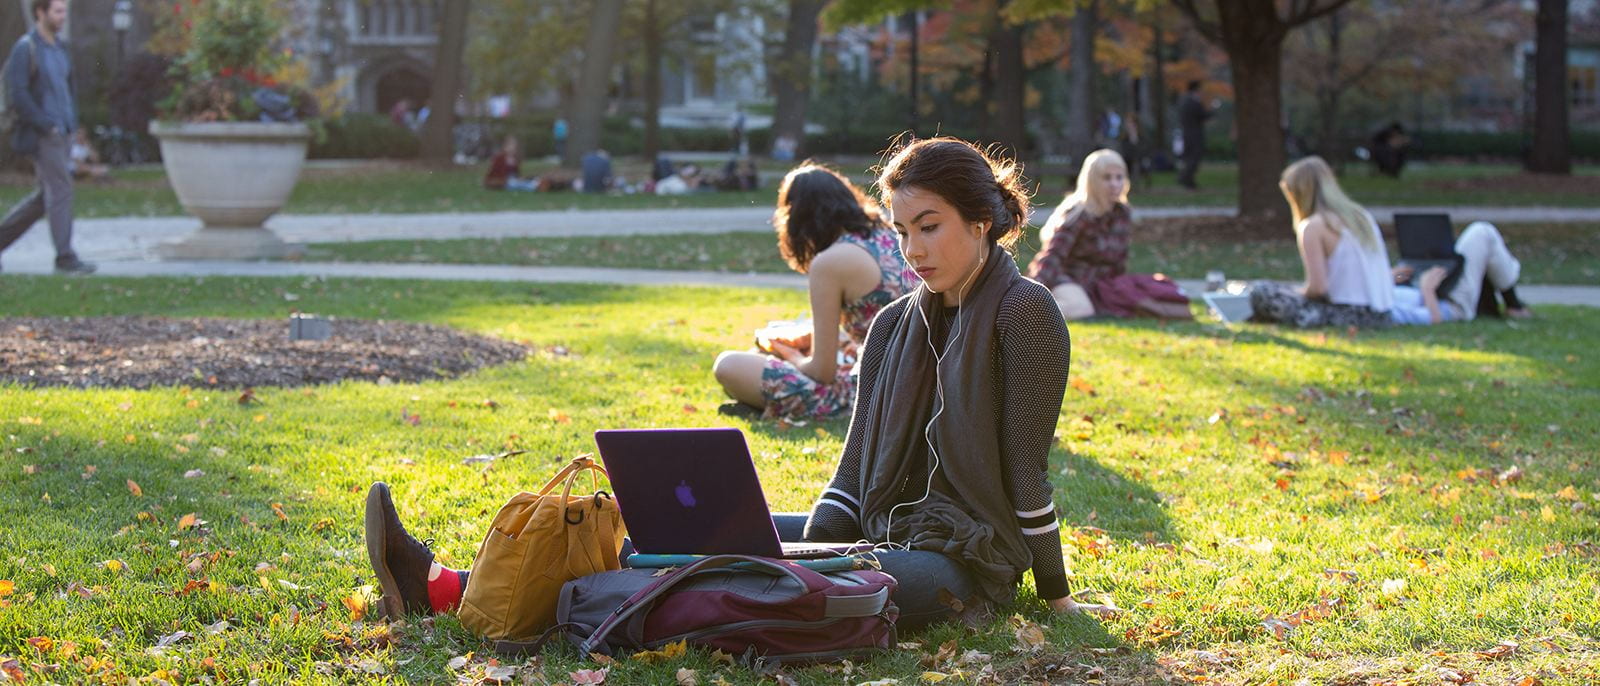 Girl in quad with laptop